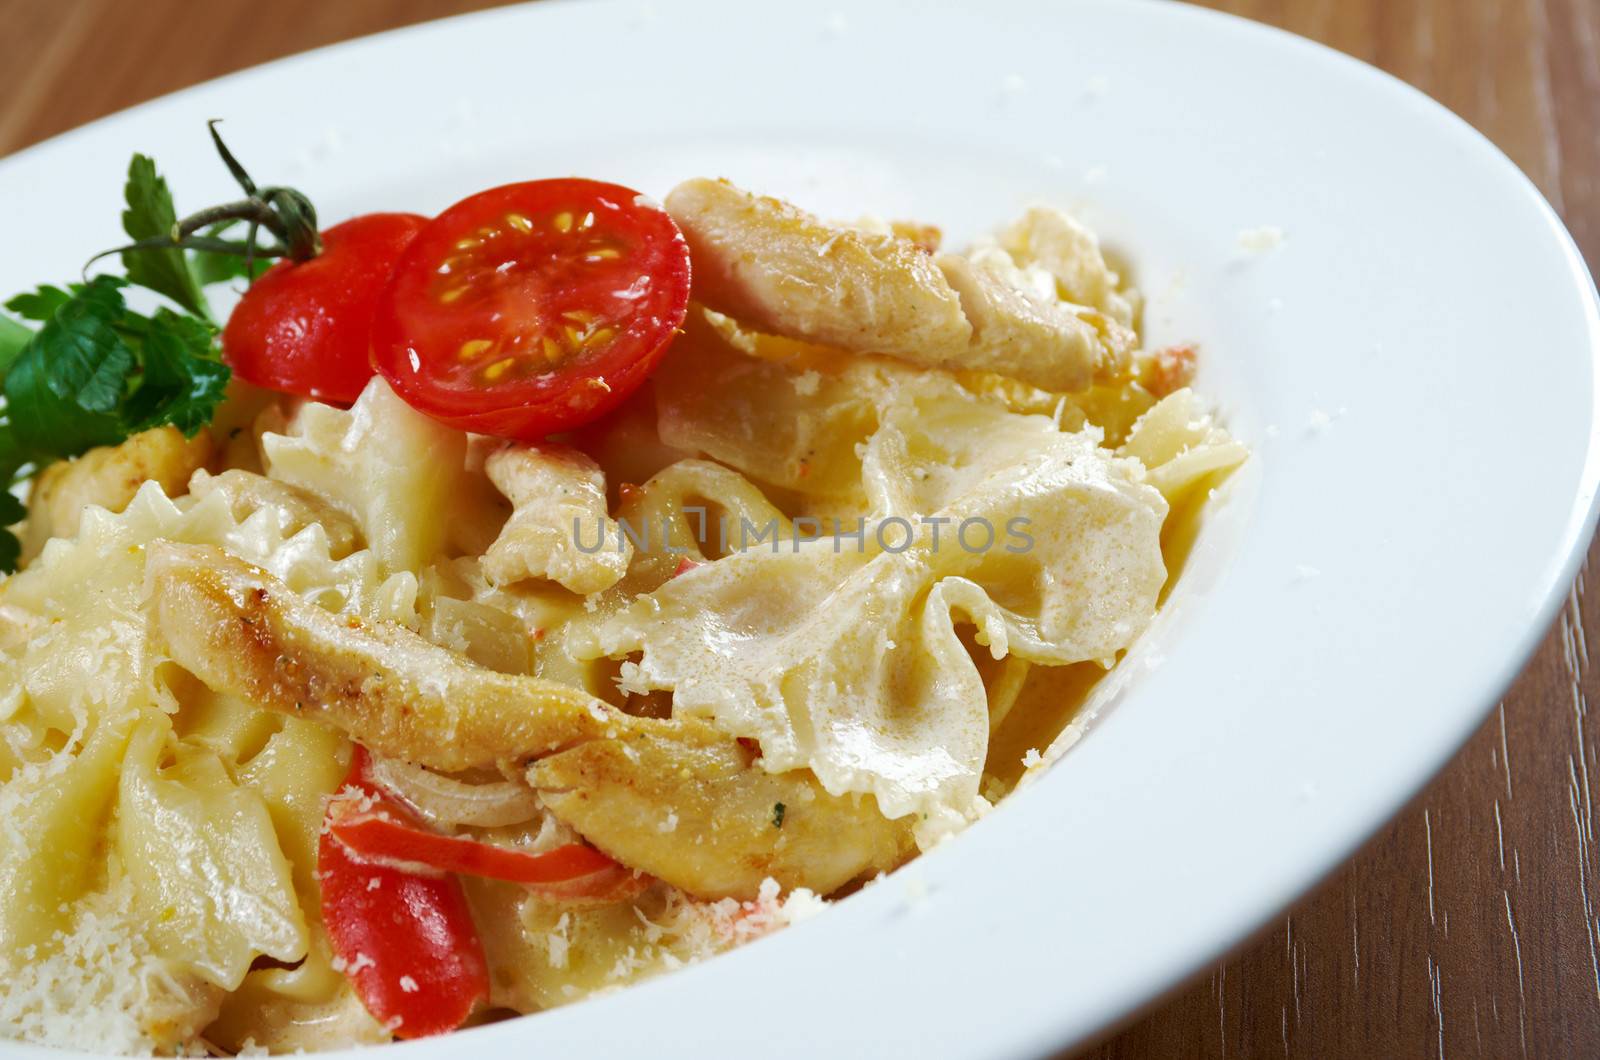 Farfalle pasta with cream sauce and tomatoes